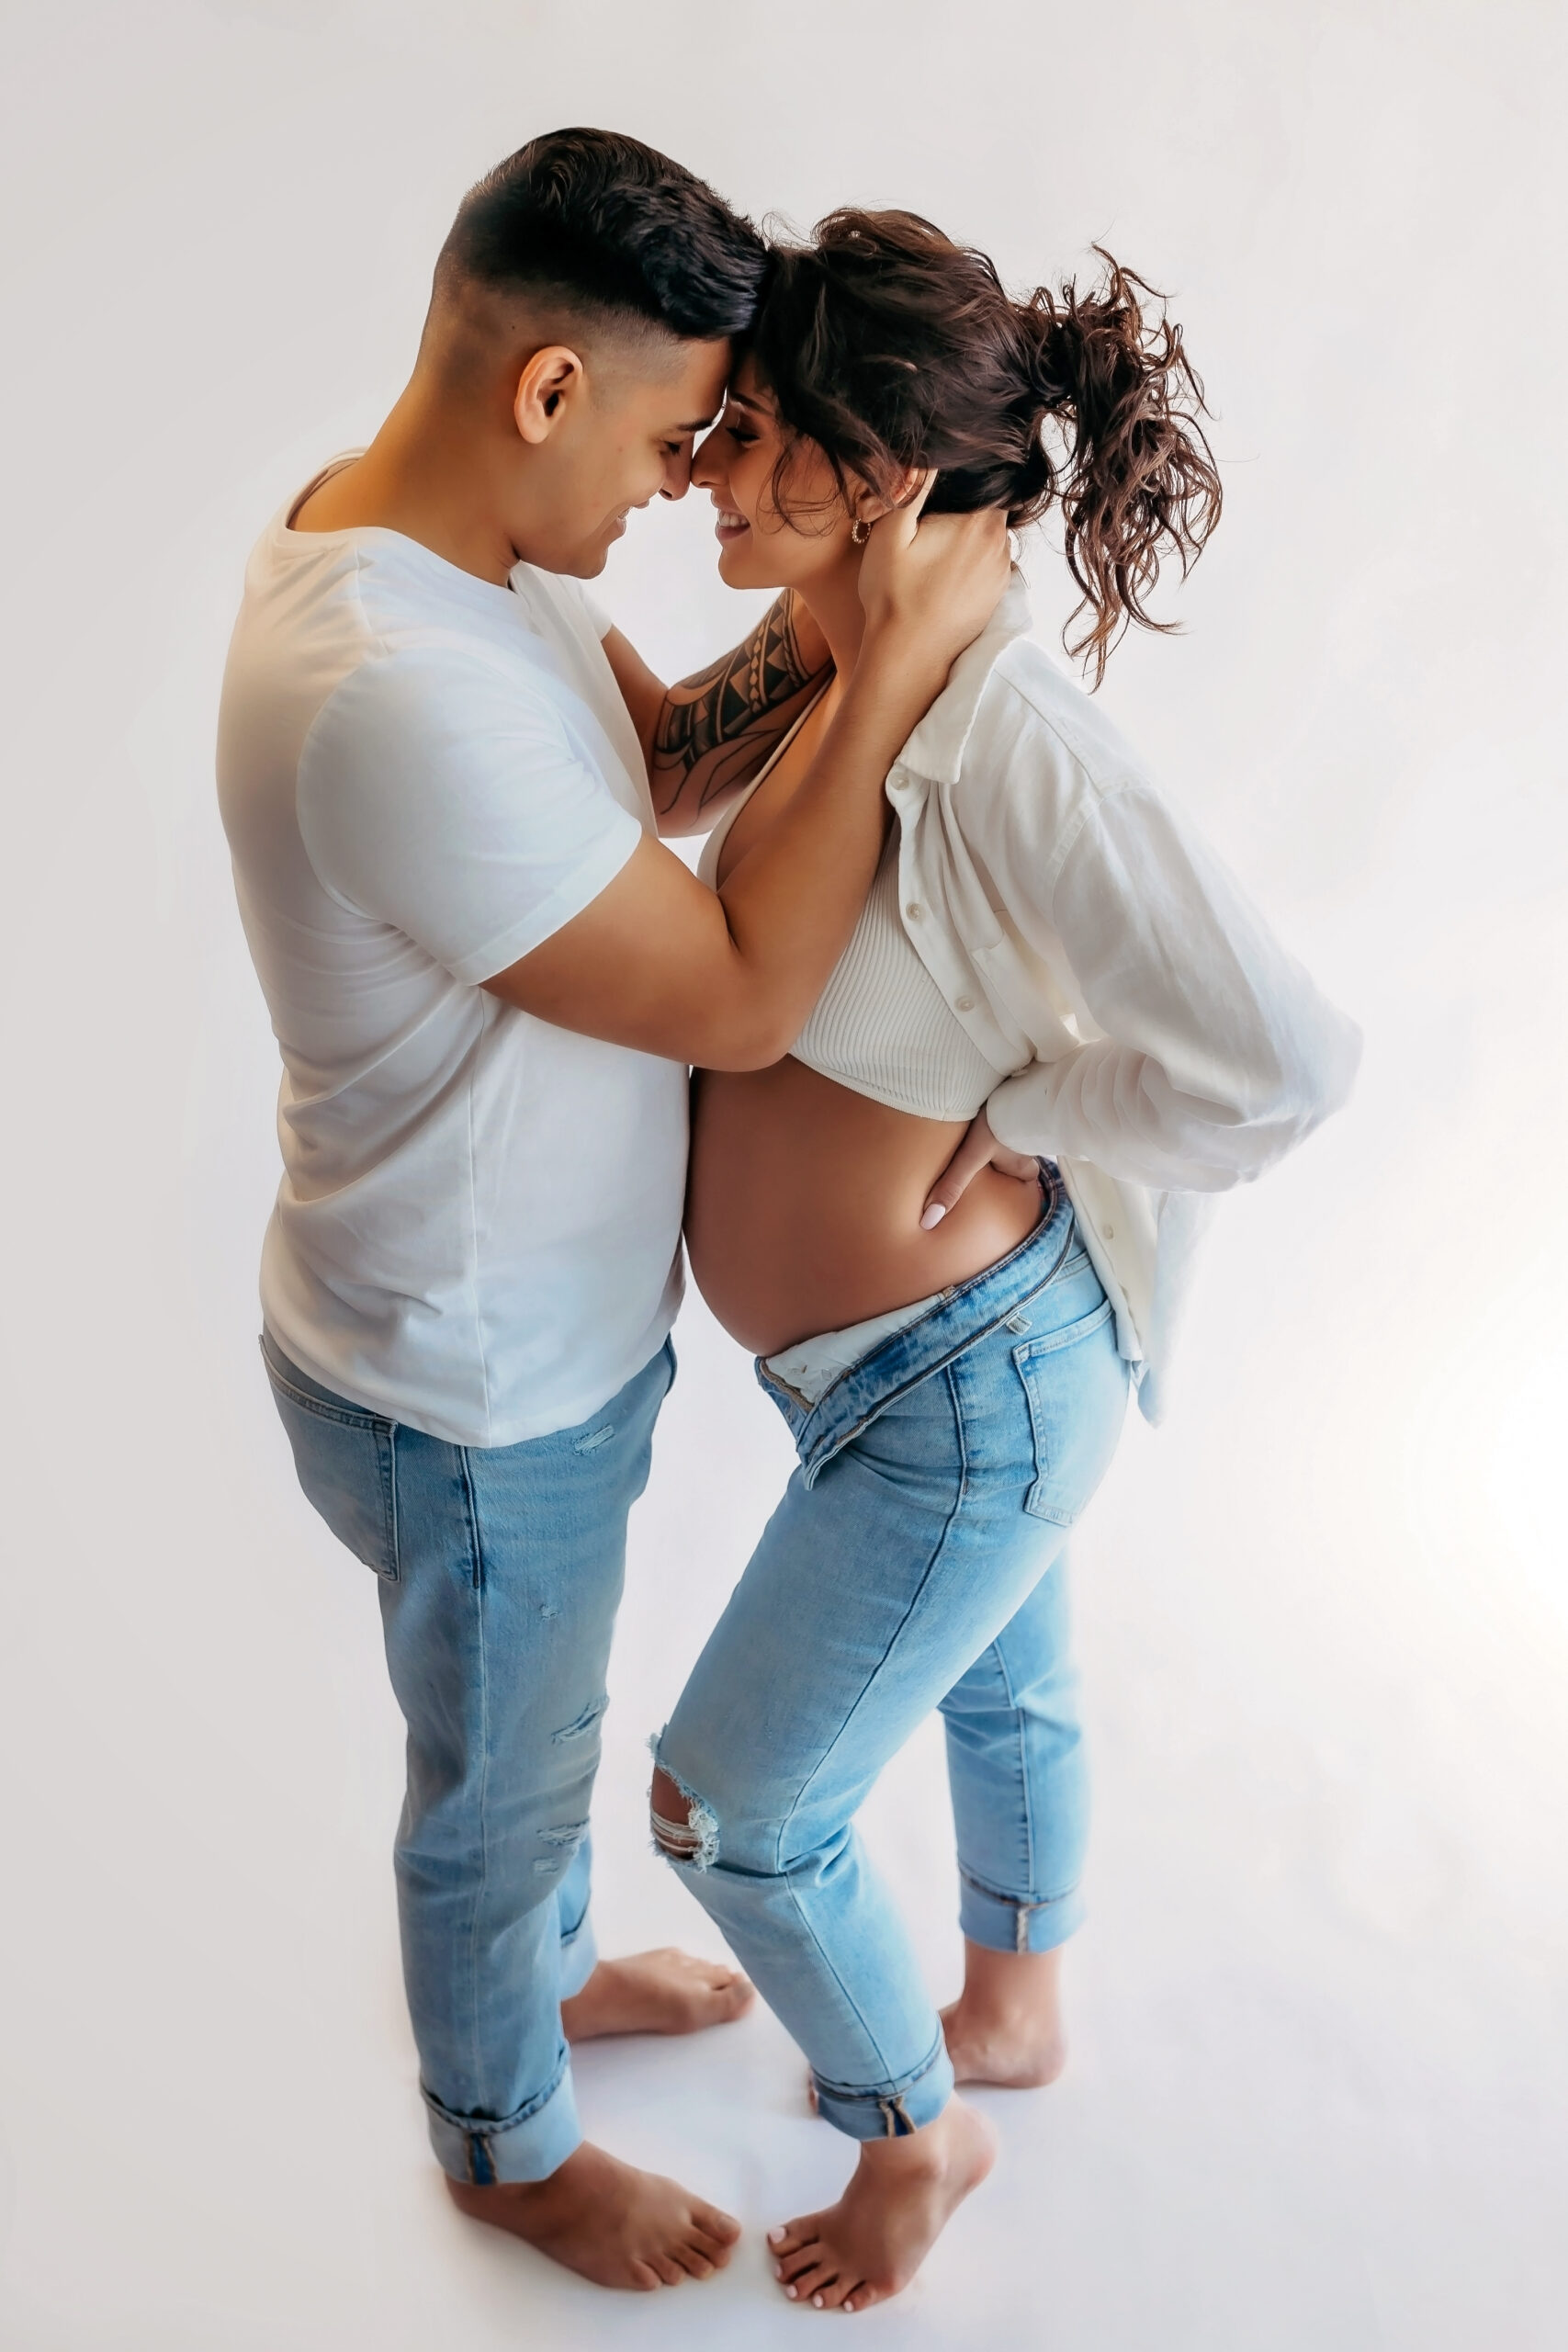 chester, virginia photographer, Chester, Virginia maternity photographer, Chester, virginia newborn photographer, pregnant woman and husband in jeans and white t-shirts standing on white backdrop